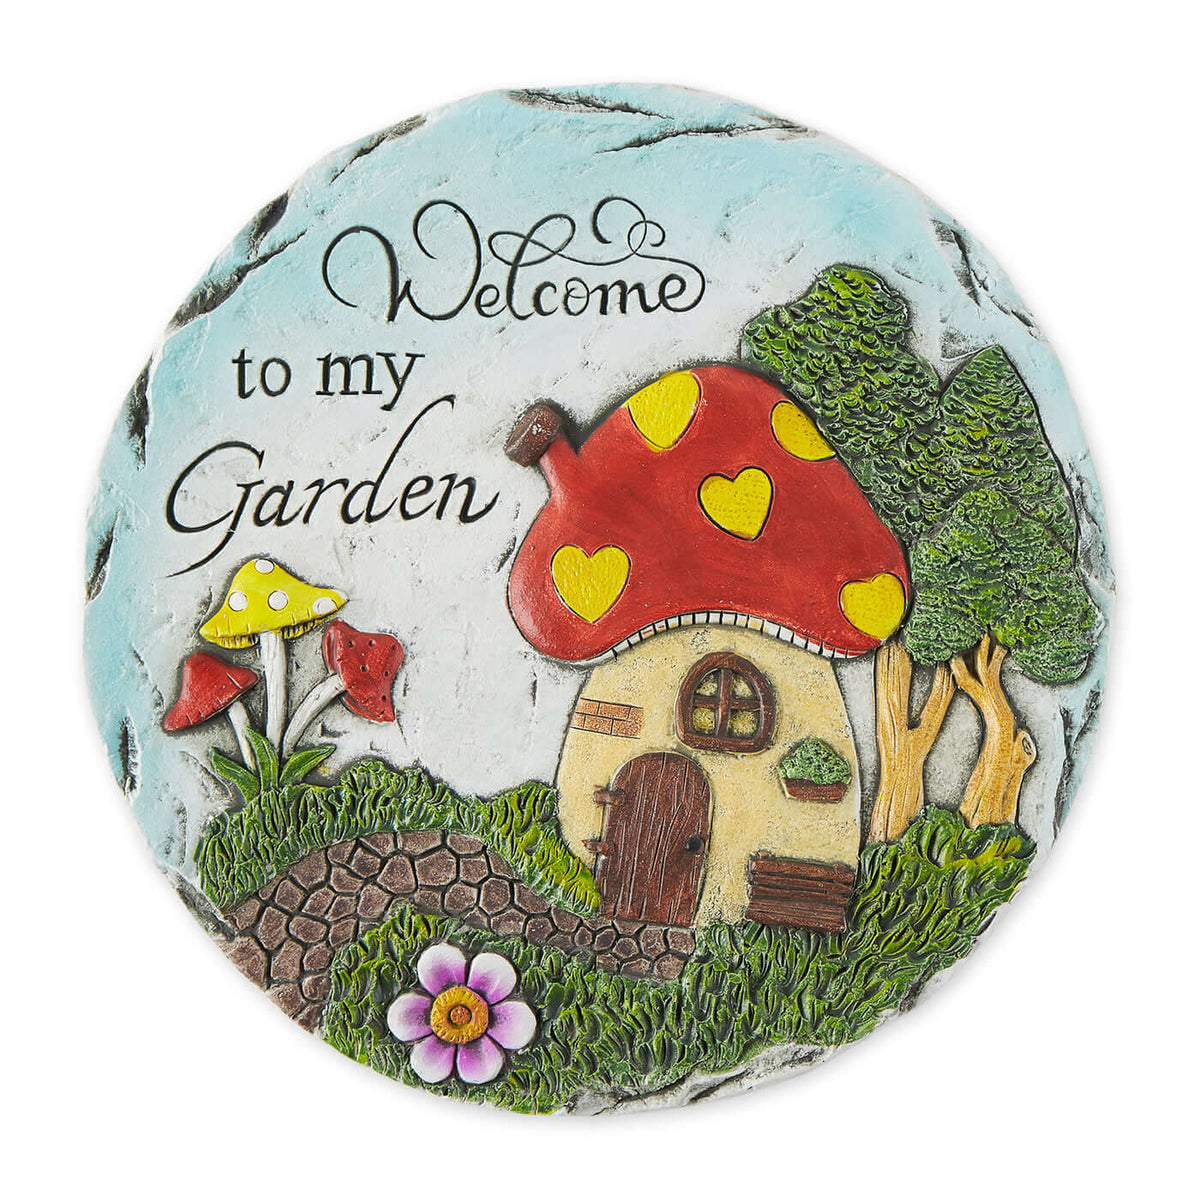 Welcome to My Garden and Welcome Friends Stepping Stone- The House of Awareness